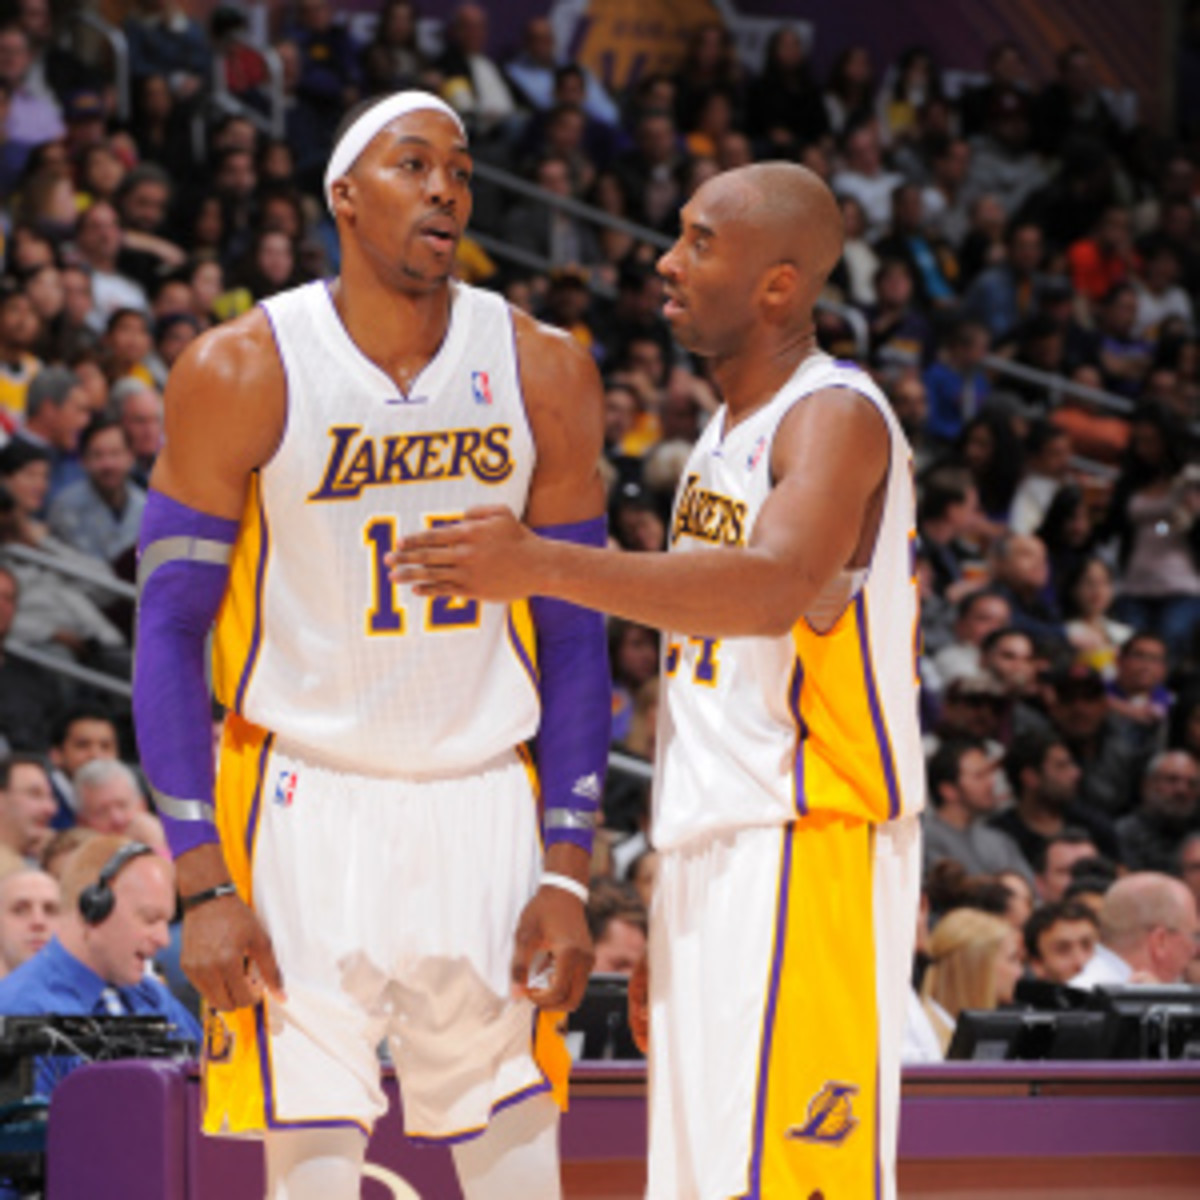 Kobe Bryant said the Lakers don't have time for Dwight Howard to heal. (Andrew D. Bernstein/Getty Images)